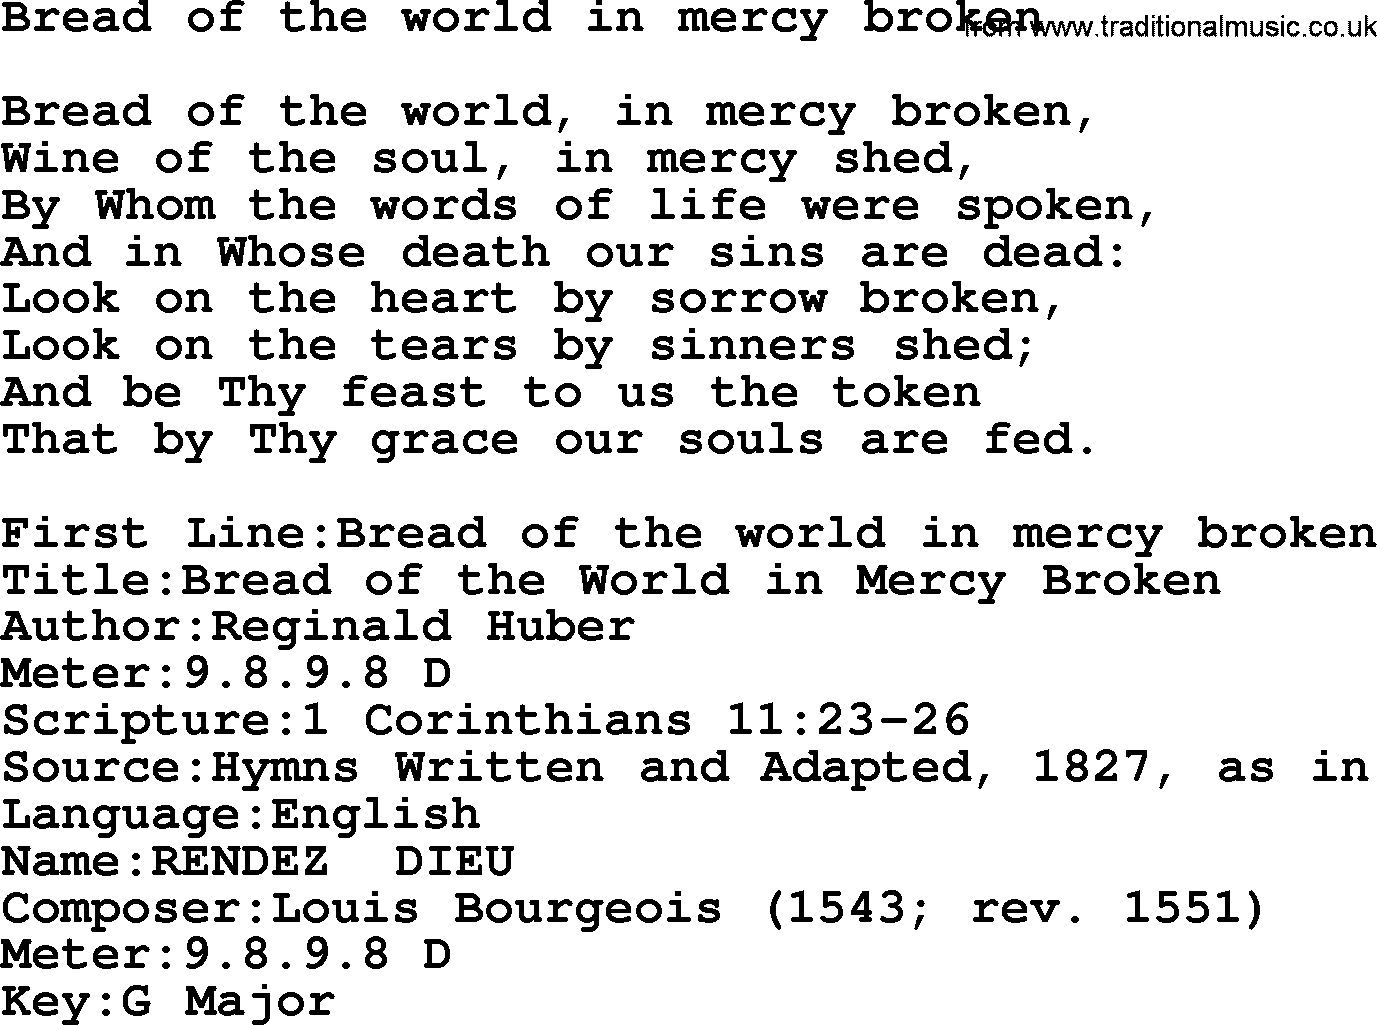 Presbyterian Hymns collection, Hymn: Bread Of The World In Mercy Broken, lyrics and PDF